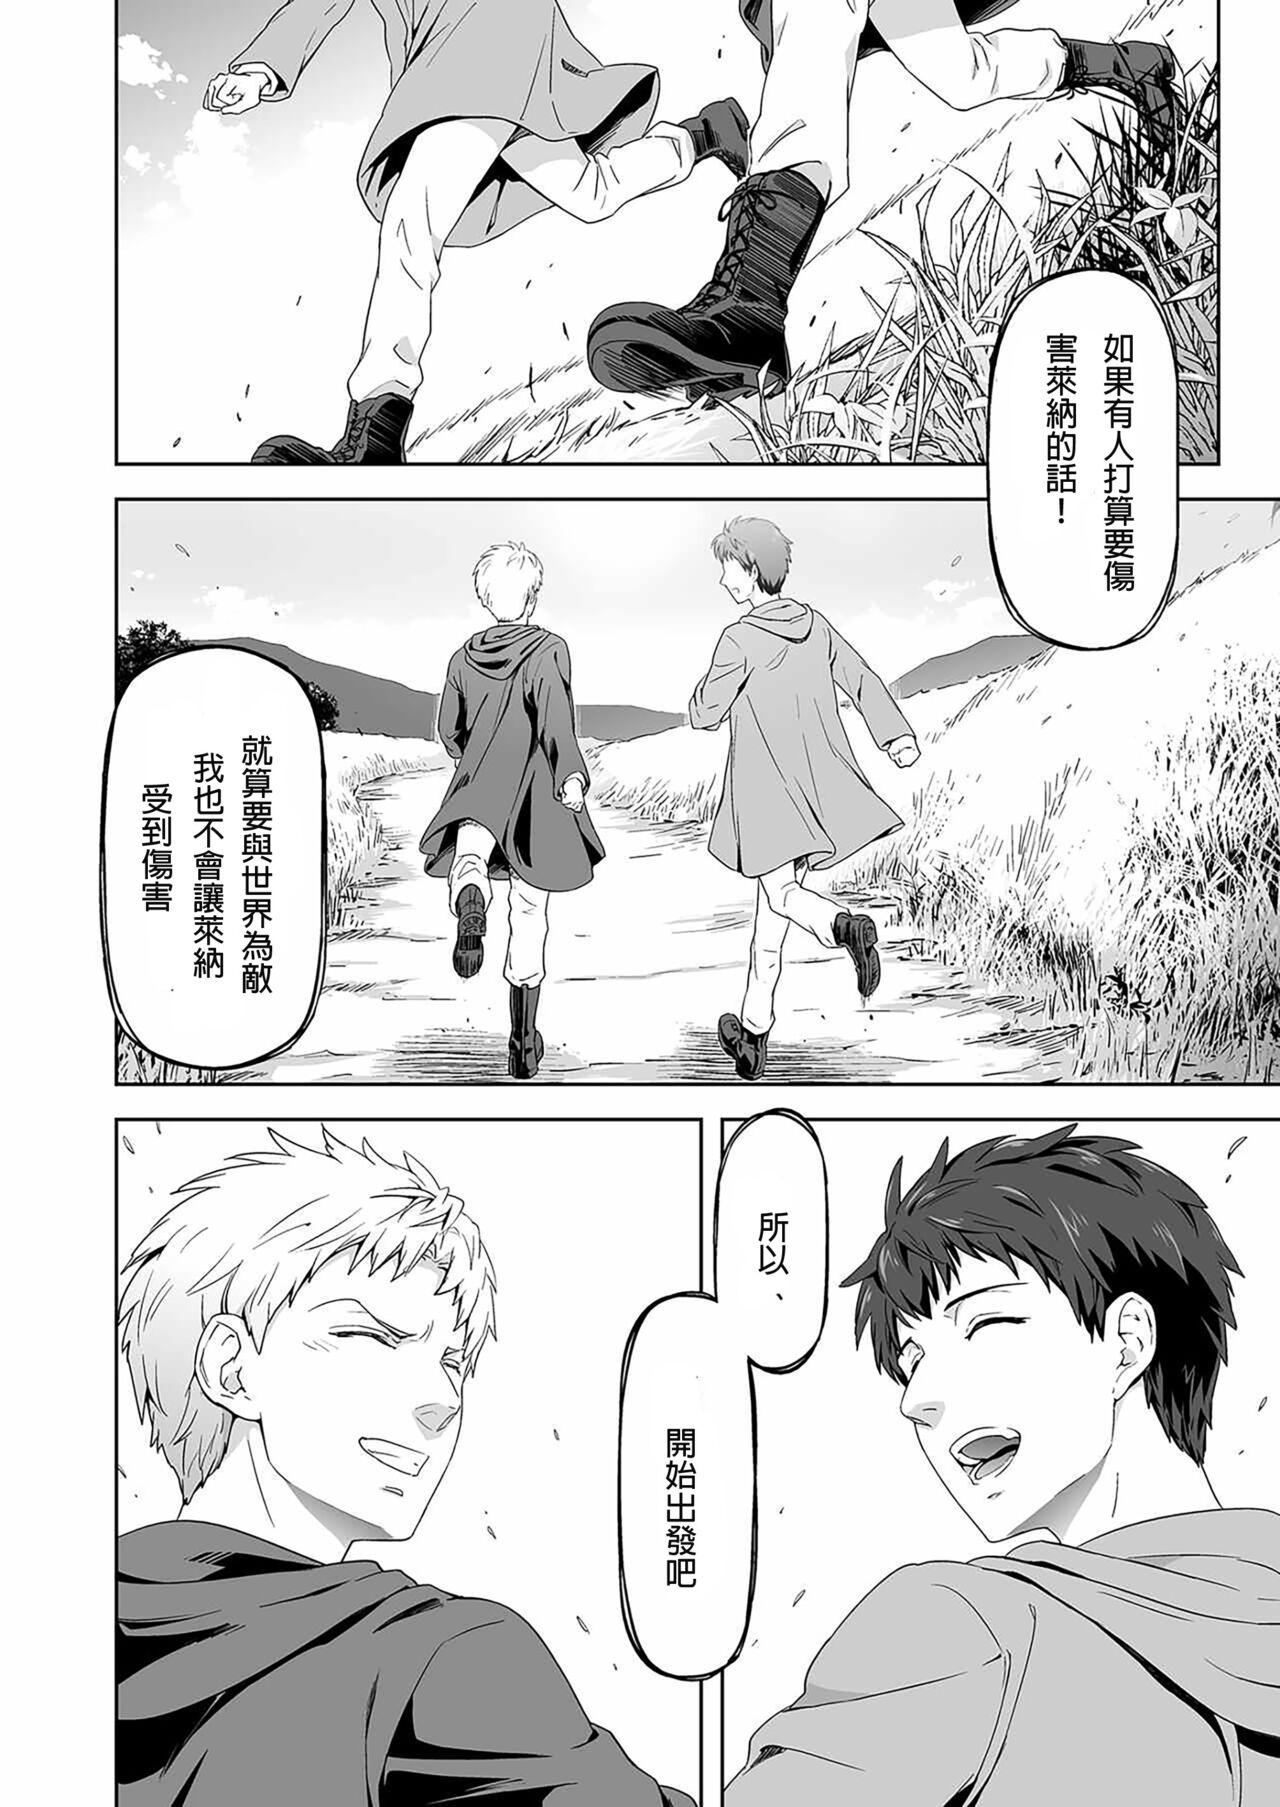 Fucking Pussy Reiner Braun x Bertolt Hoover   are the ma ssa cre - Shingeki no kyojin | attack on titan Family Taboo - Page 37